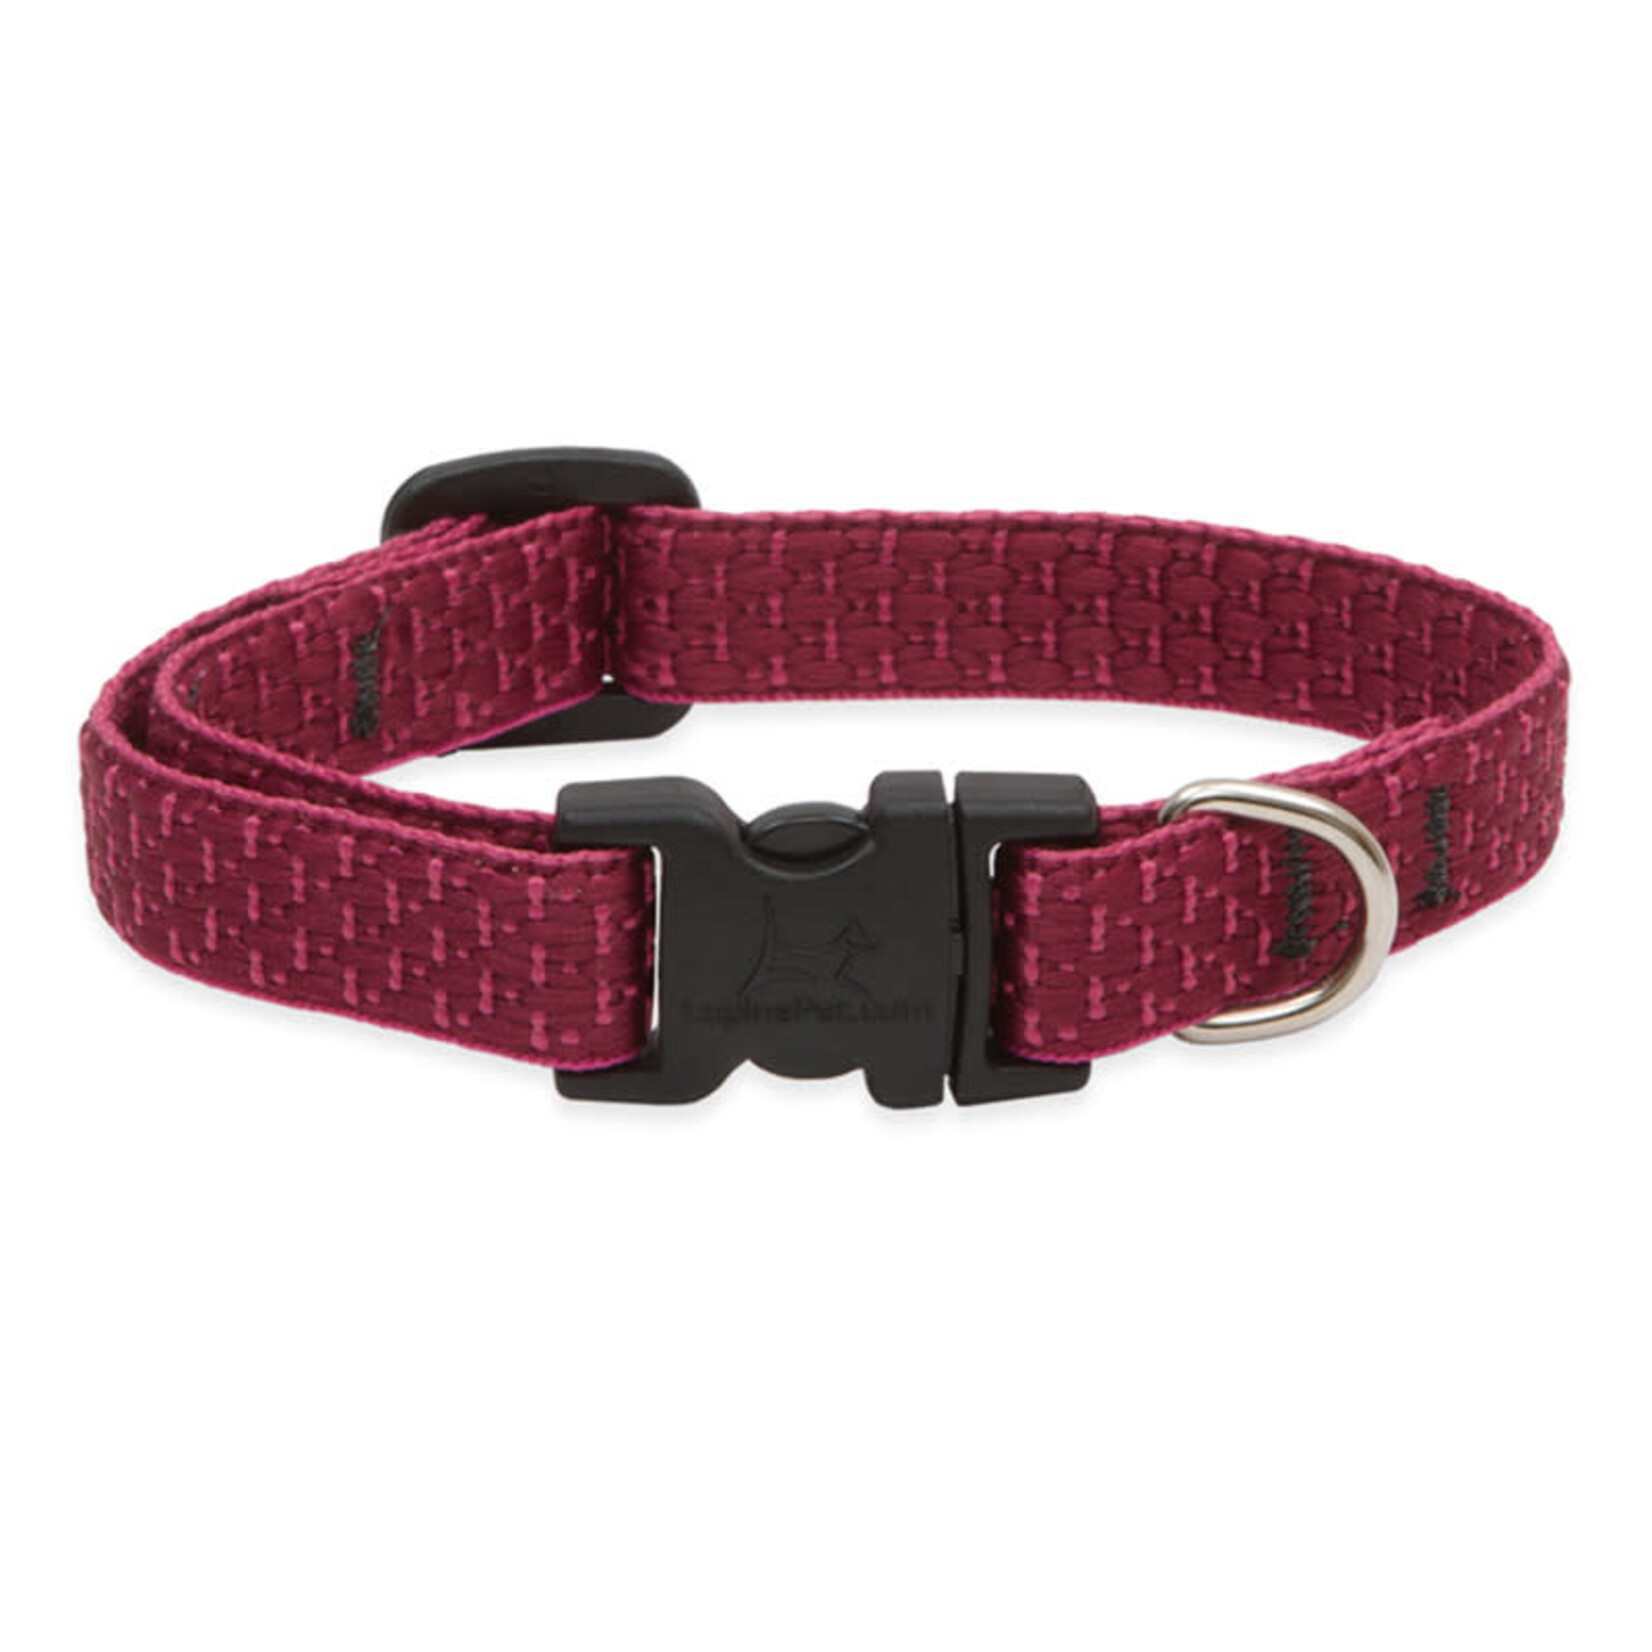 Lupine Lupine Berry 1/2 in x 10-16 in Adjustable Collar